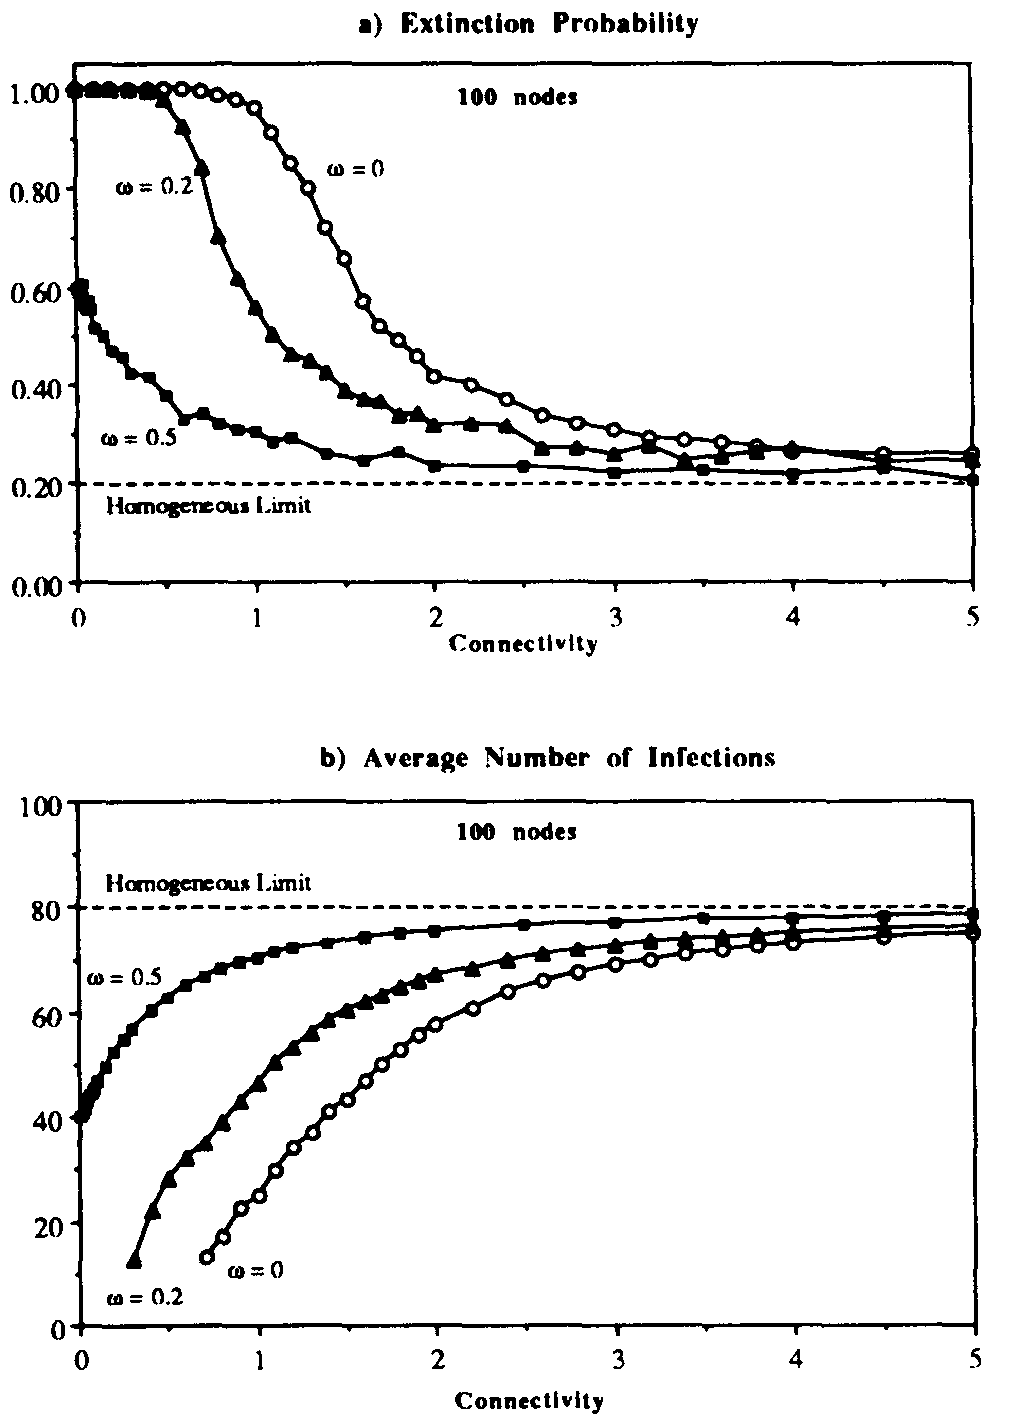 Figure 6: Extinction probability (a) and average number of infections (b) vs. connectivity \overline{b} for random graph with weak links. Three different values of the ratio \omega between the sum of the weaklink infection rates and the sum of the strong-link infection rates are presented. As usual, the infection and cure rates arc \beta' = 1.0 and \delta = 0.2. Each point represents an average over 2500 simulation runs on 100-nodegraphs. As the weak links become stronger, the extinction probability and the average number of infections approach their homogeneous limits over a wider range of connectivities.